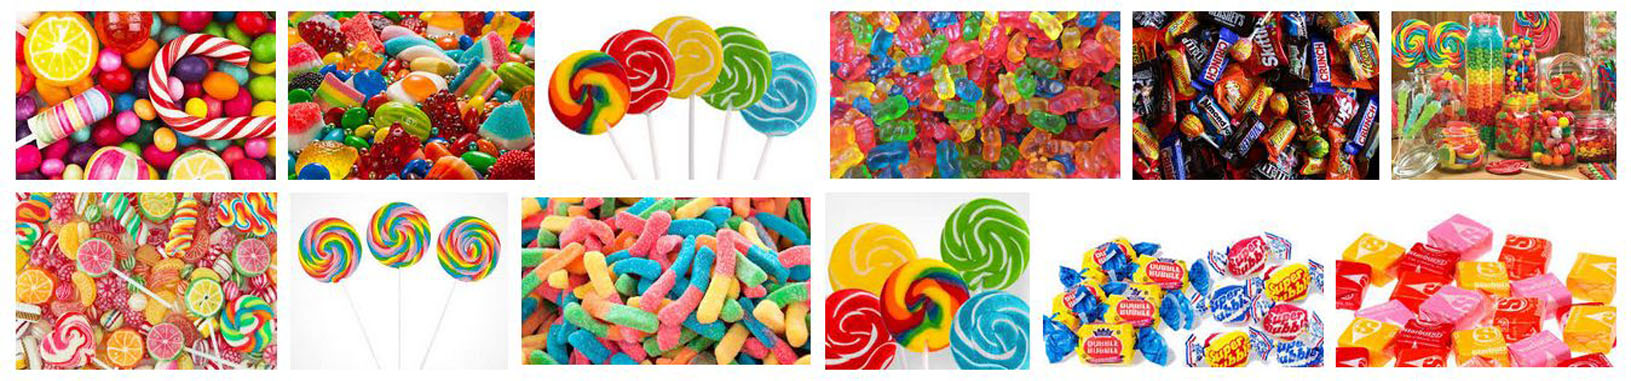 Online Candy Stores